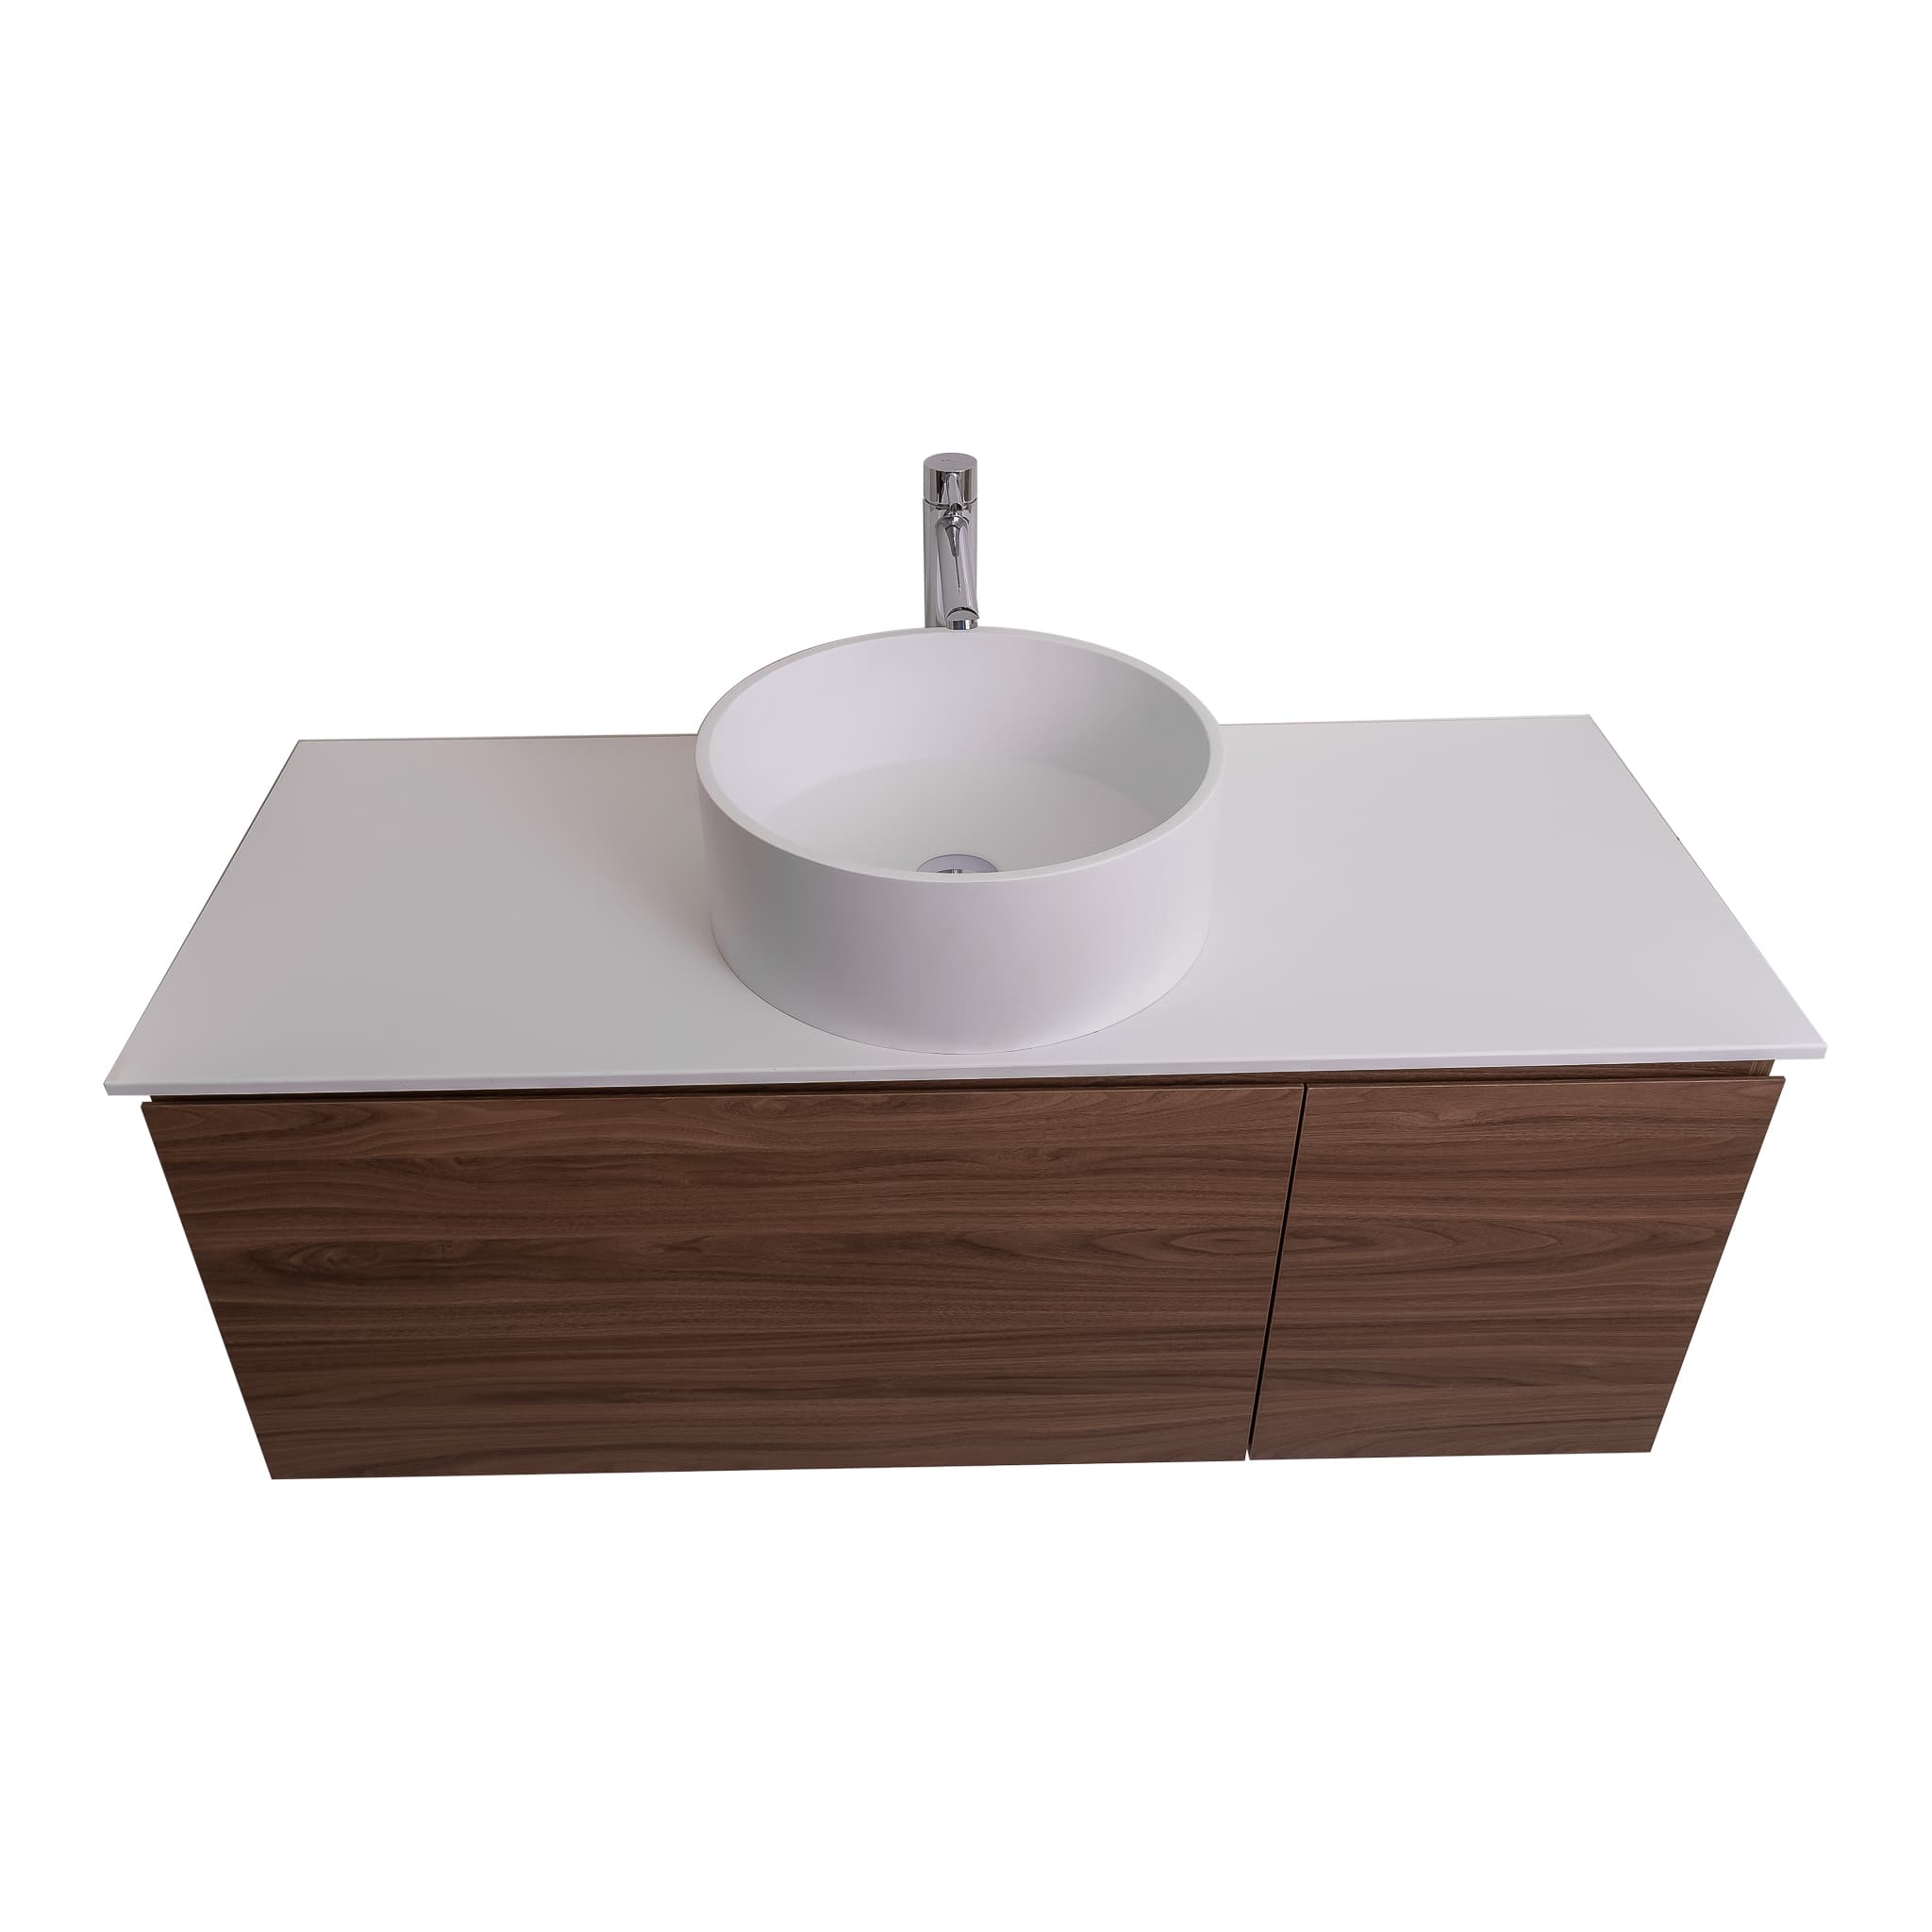 Venice 47.5 Walnut Wood Texture Cabinet, Solid Surface Flat White Counter And Round Solid Surface White Basin 1386, Wall Mounted Modern Vanity Set